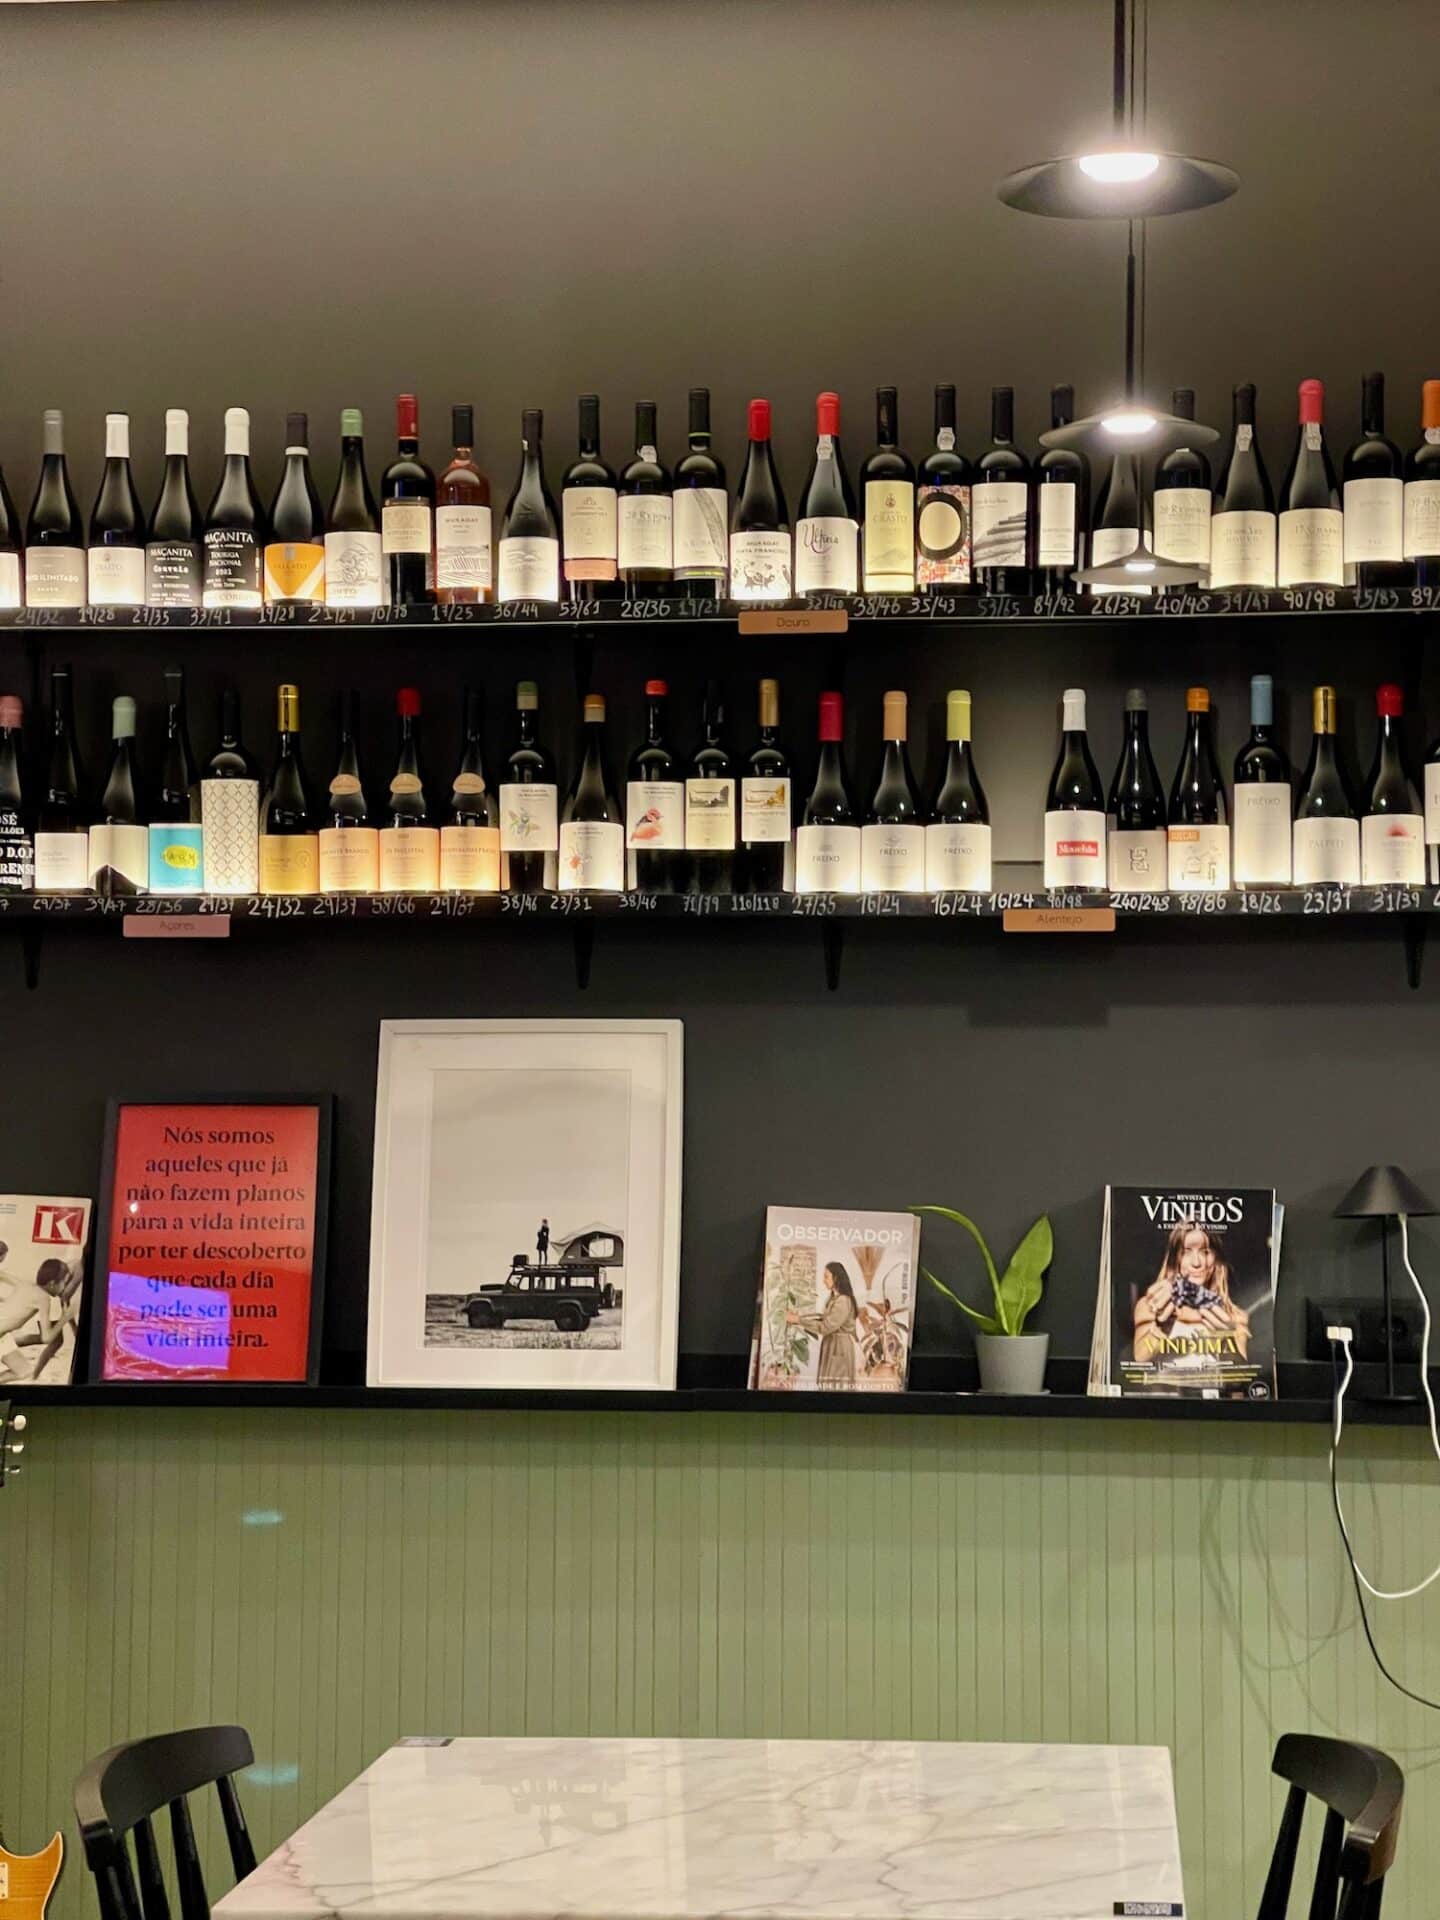 A well-lit wine bar interior featuring a variety of wine bottles on shelves, framed artwork, and magazines on a wall-mounted ledge above a marble table, reflecting the cozy and cultured ambiance of Tavira's local dining scene.